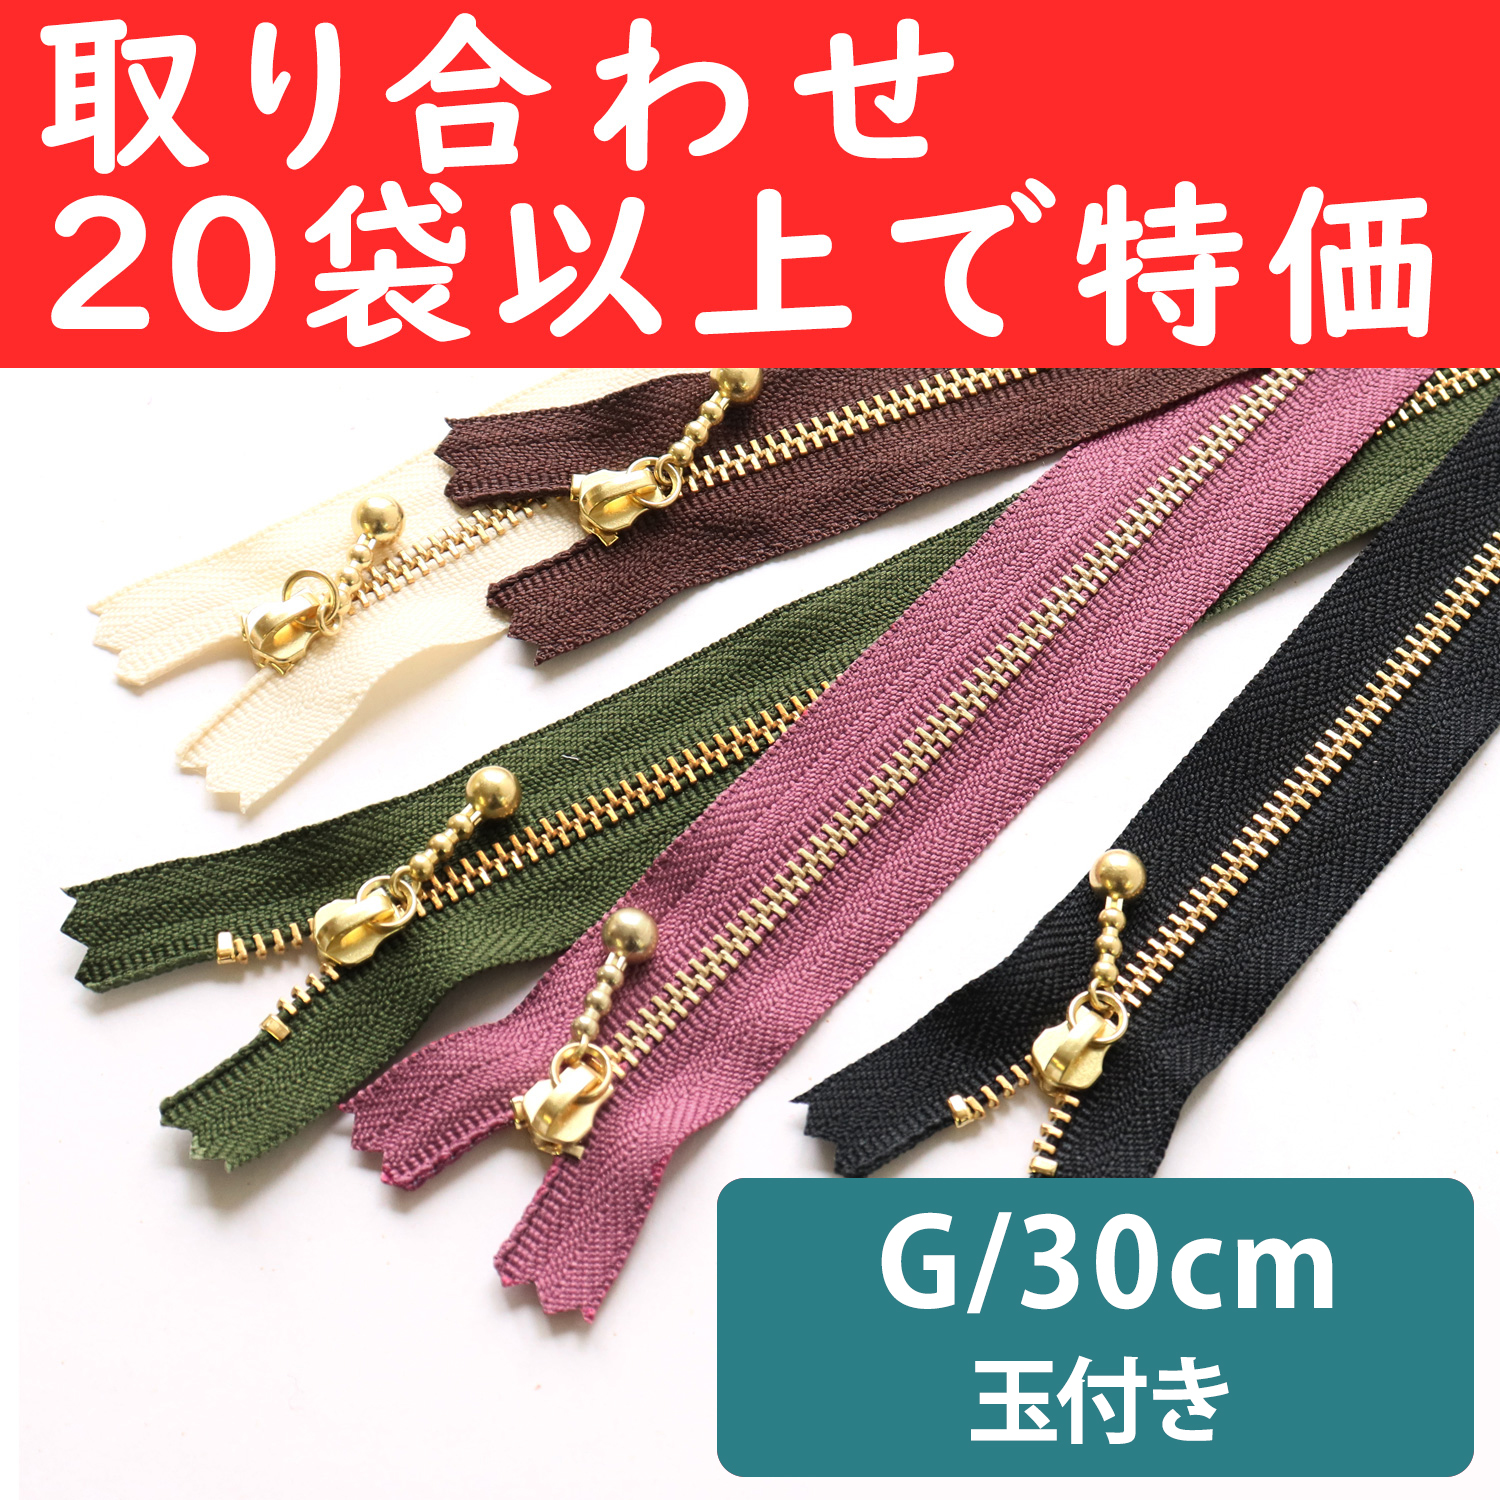 3G30-OVER200 Special)Ball Pull Zippers  G 30cm ", orders with 20 bags or more (bag)